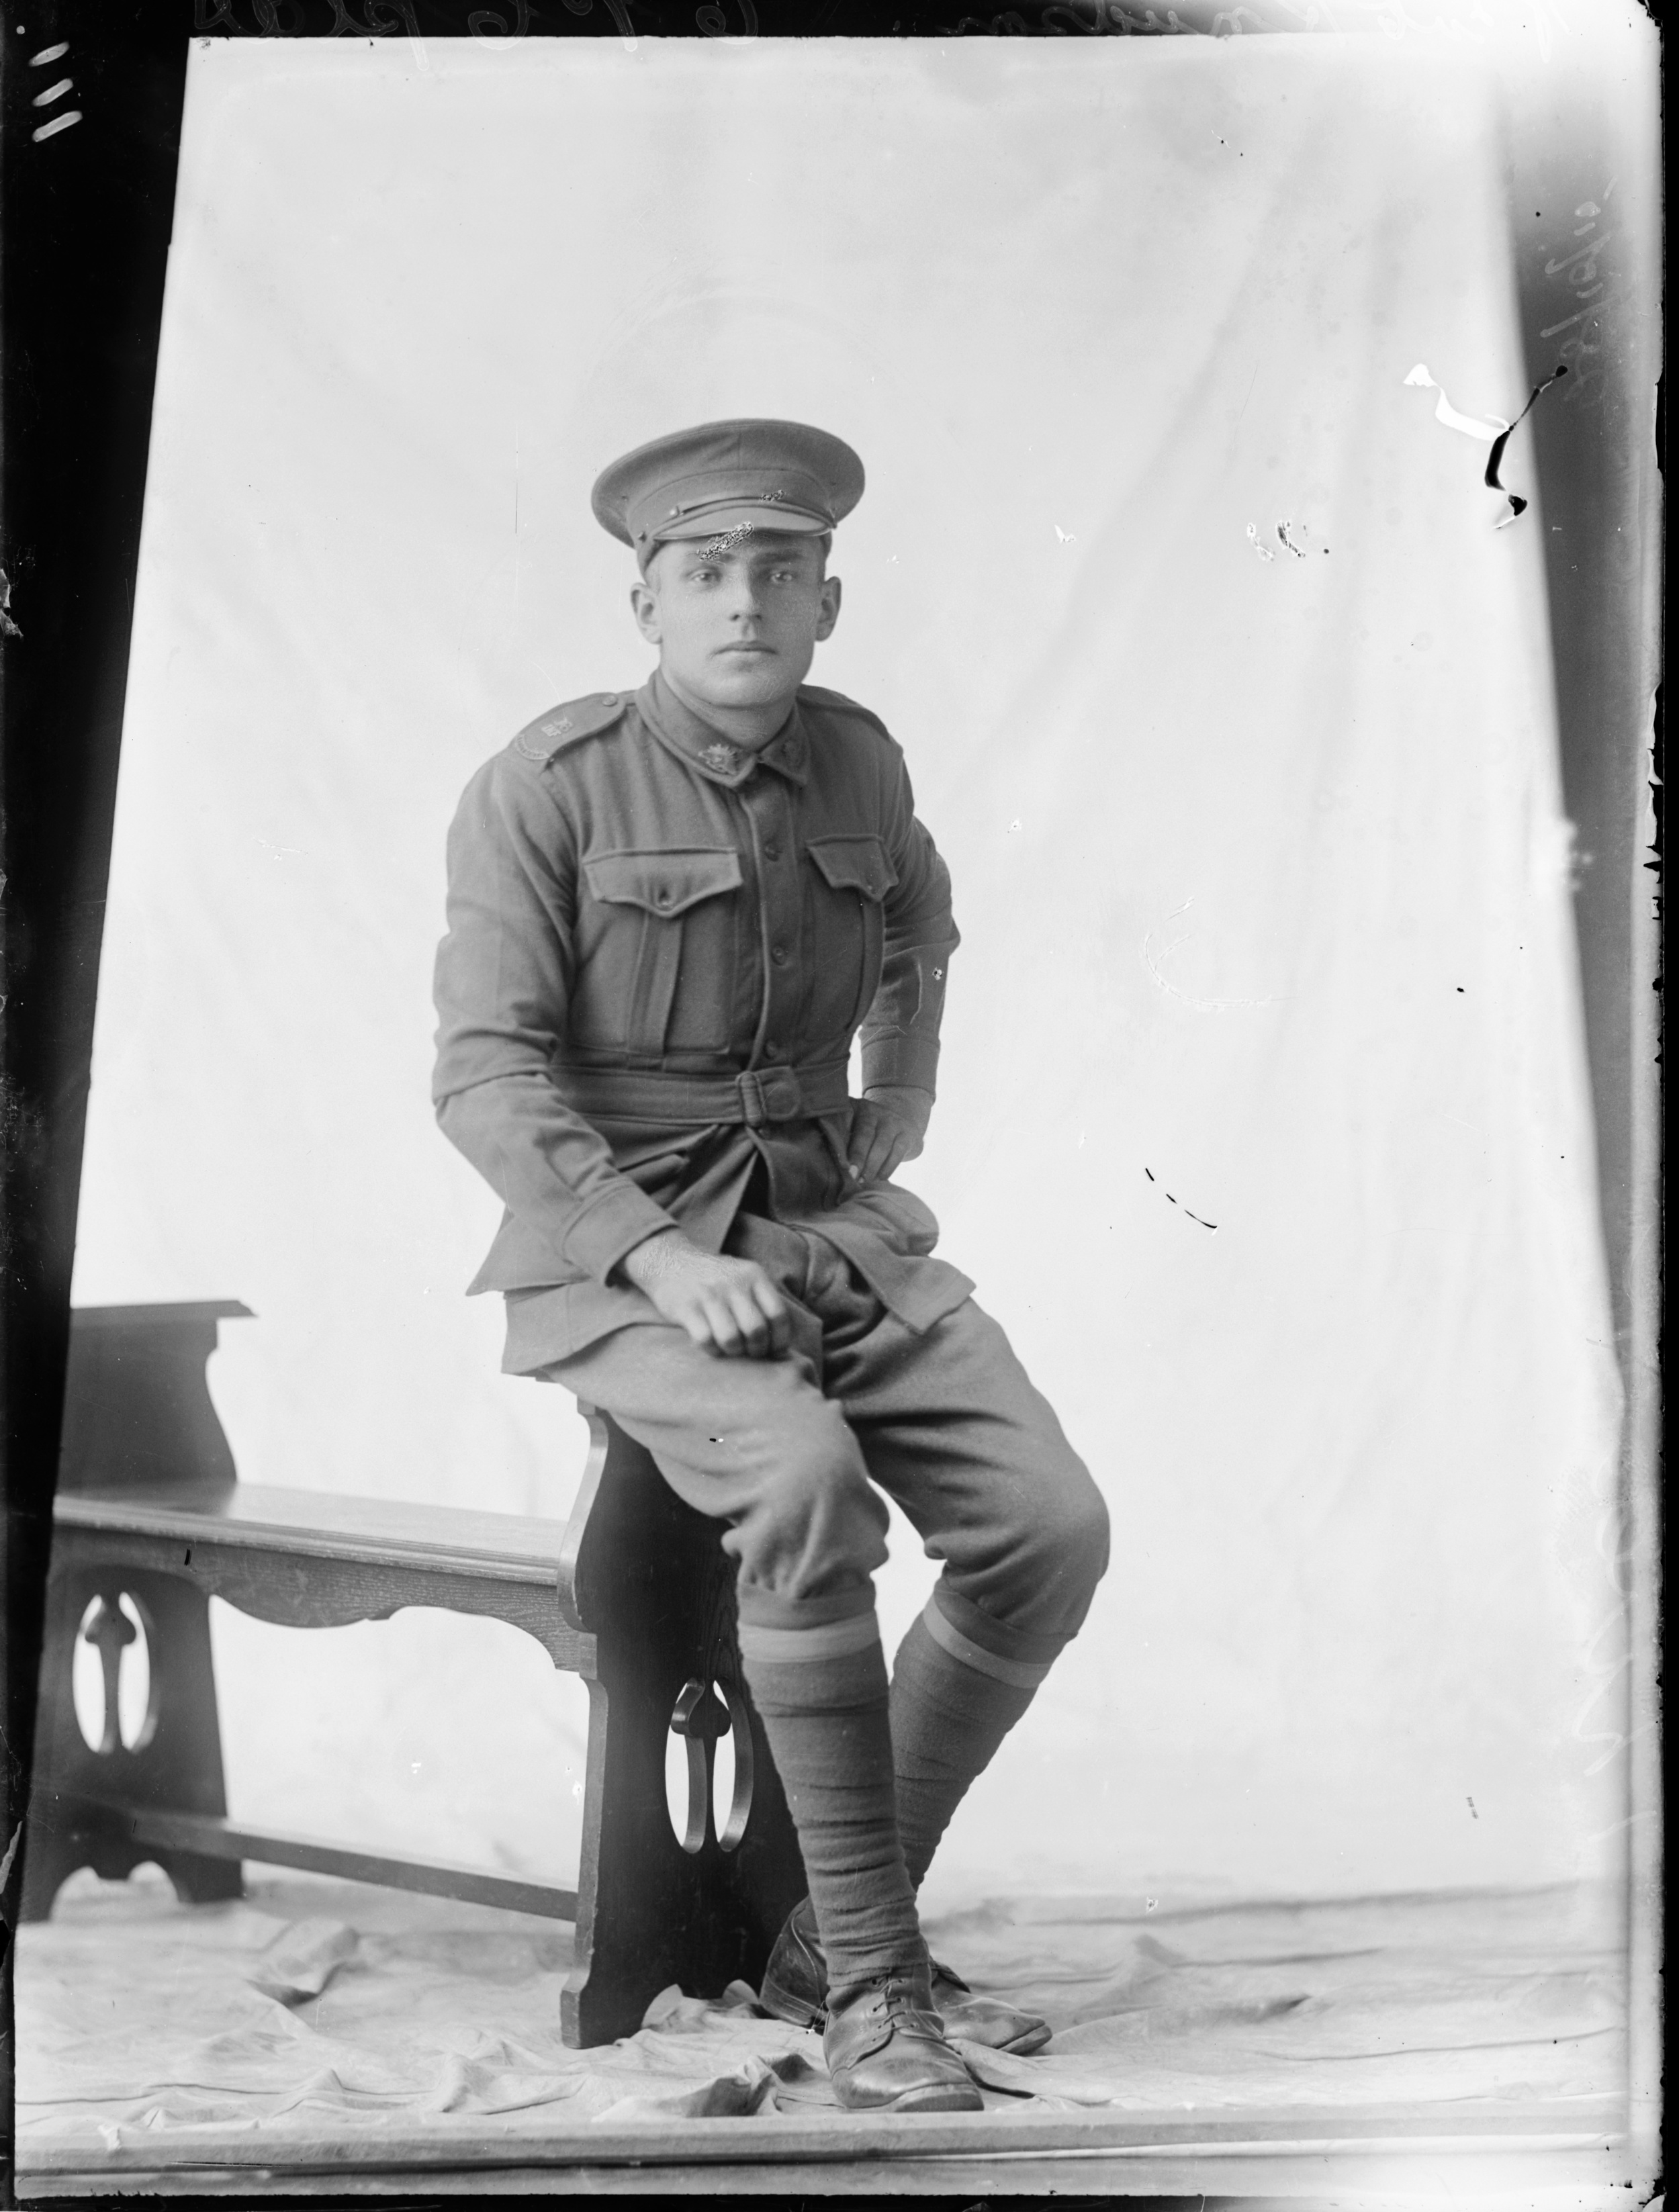 Photographed at the Dease Studio, 117 Barrack Street Perth WA Image courtesy of the State Library of Western Australia: 151447PD